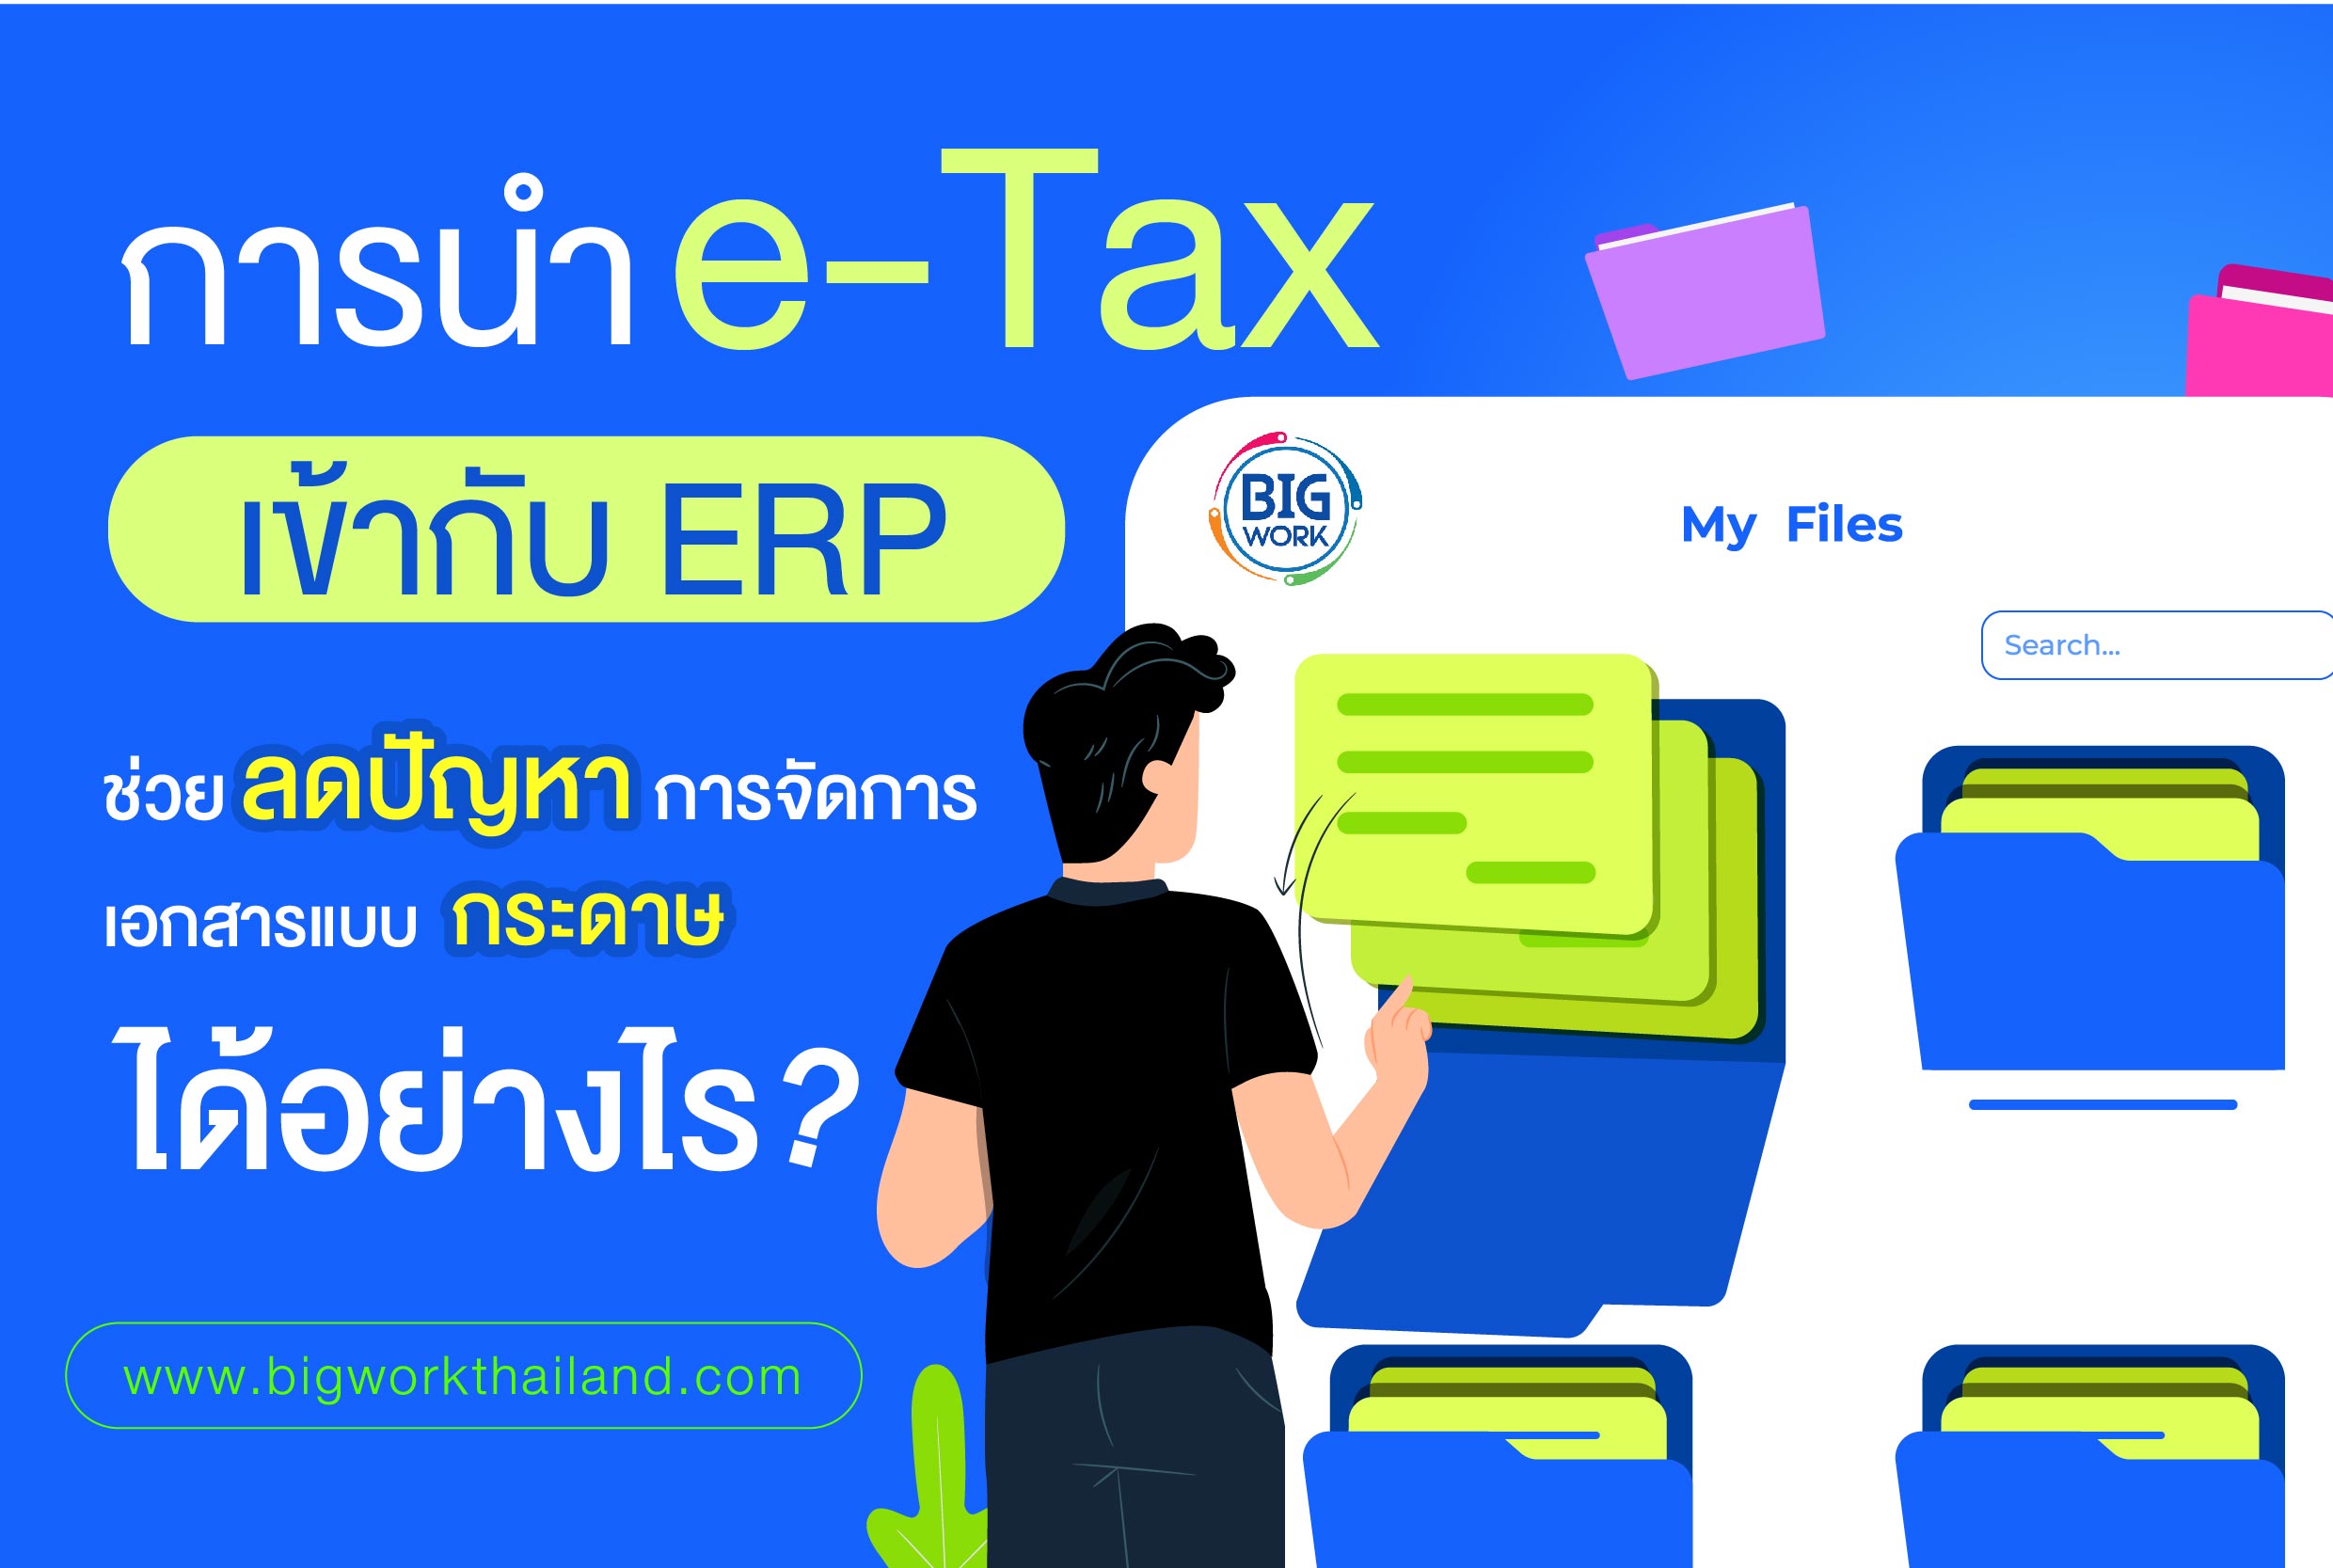 e-Tax in ERP reduce problems caused by paper documents